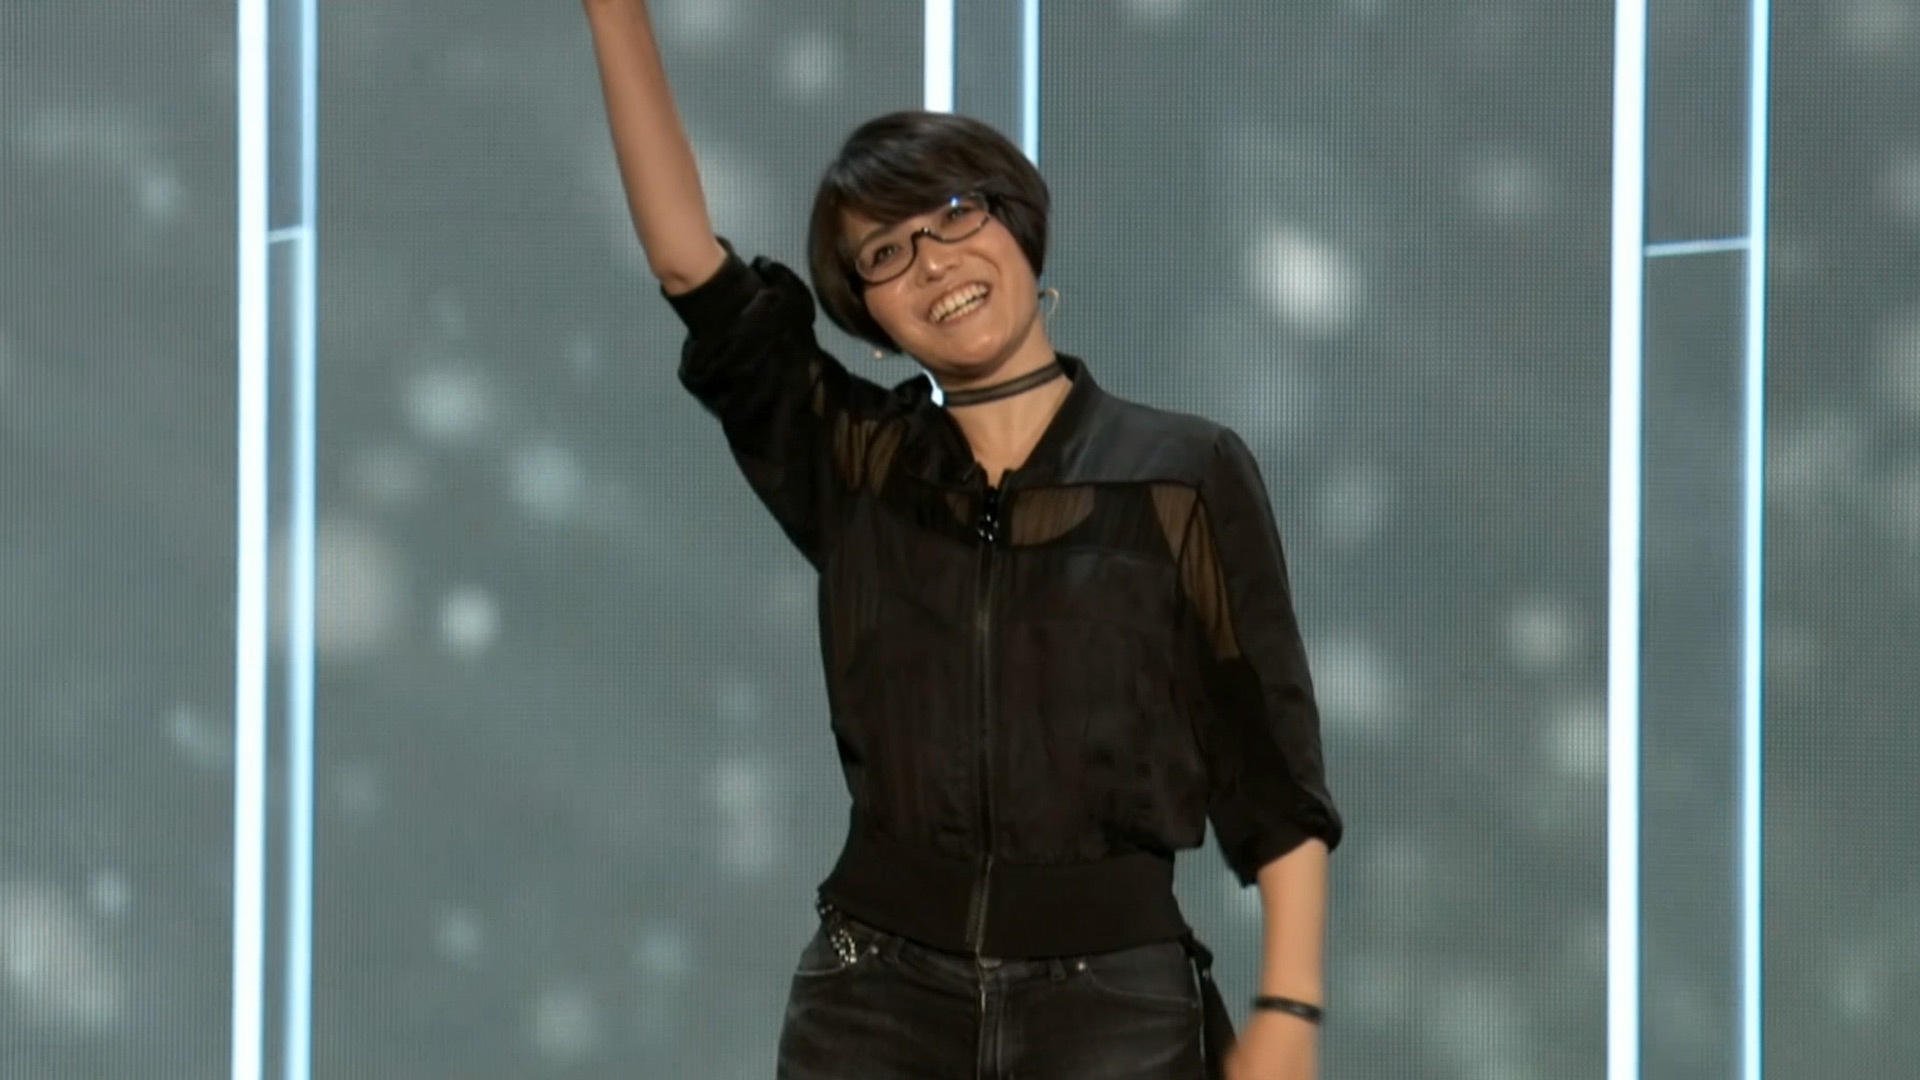 Ikumi Nakamura won E3. Now she wants to fix the games industry